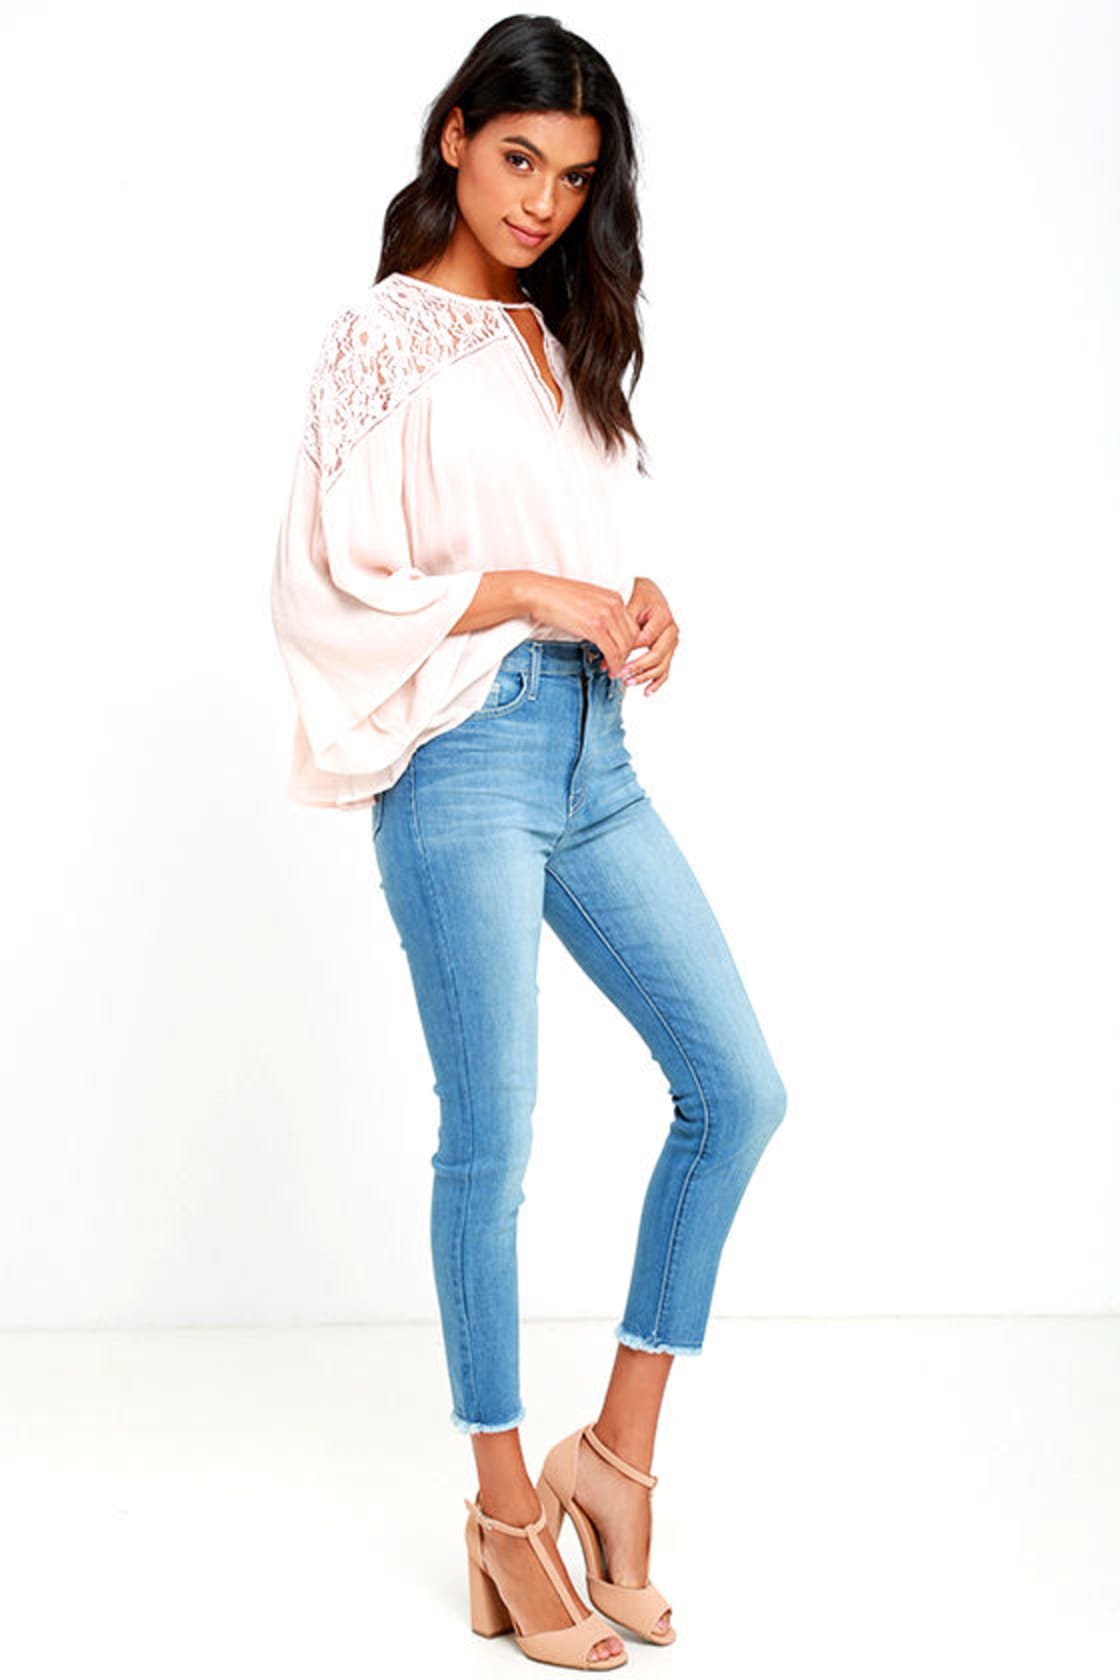 Light Wash Jeans - High-Waisted Jeans - Cropped Jeans - $69.00 - Lulus